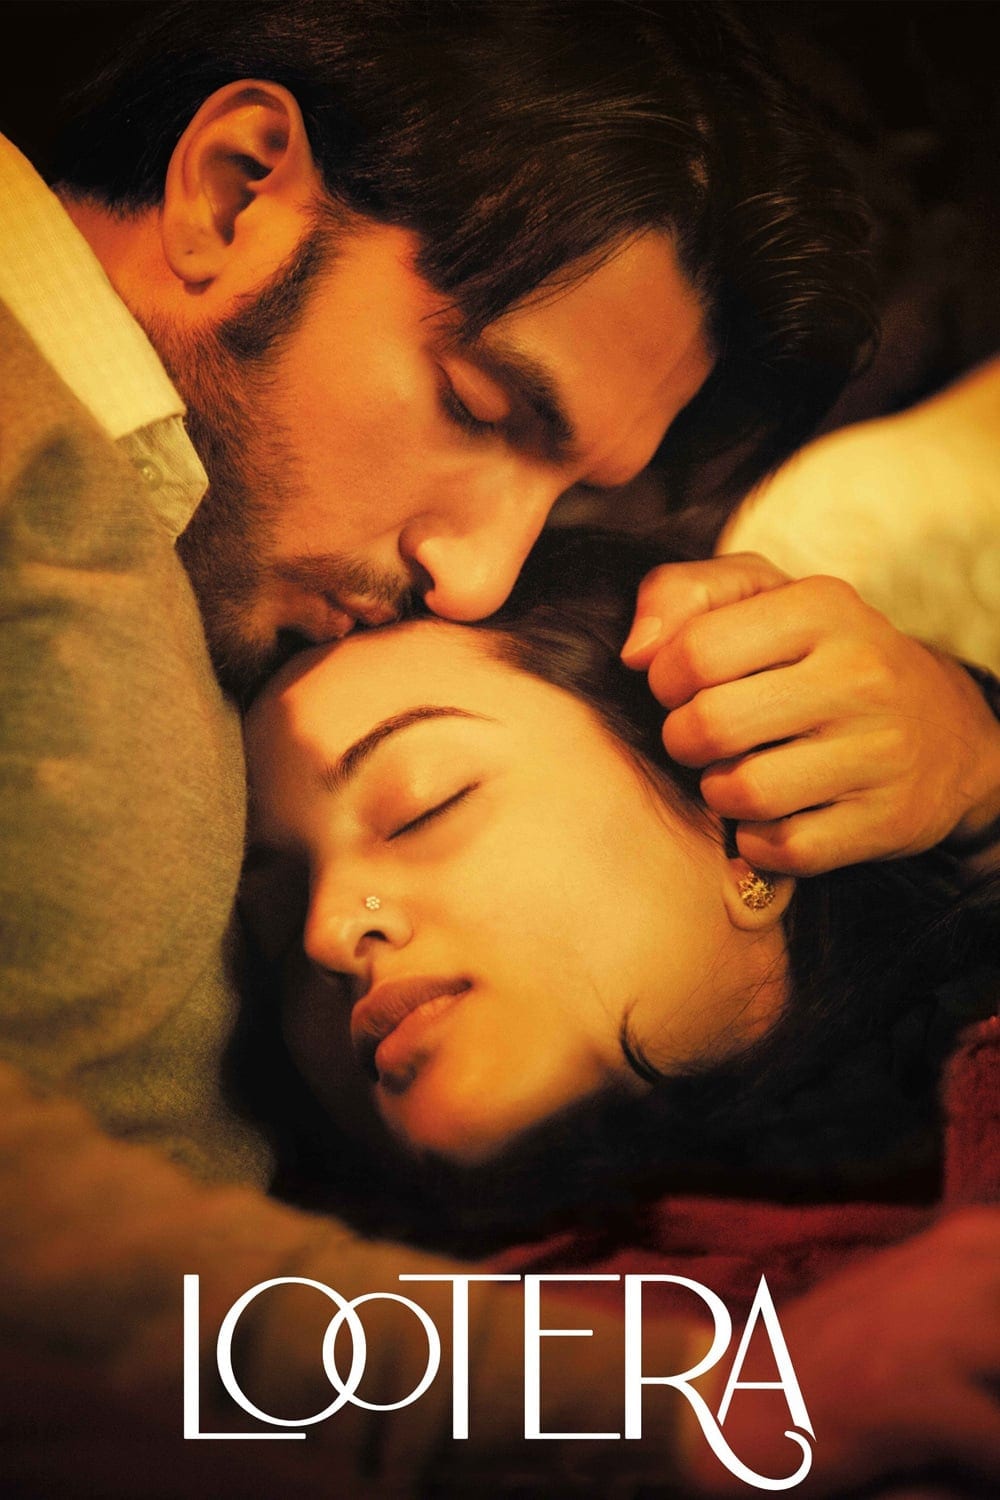 Poster for the movie "Lootera"